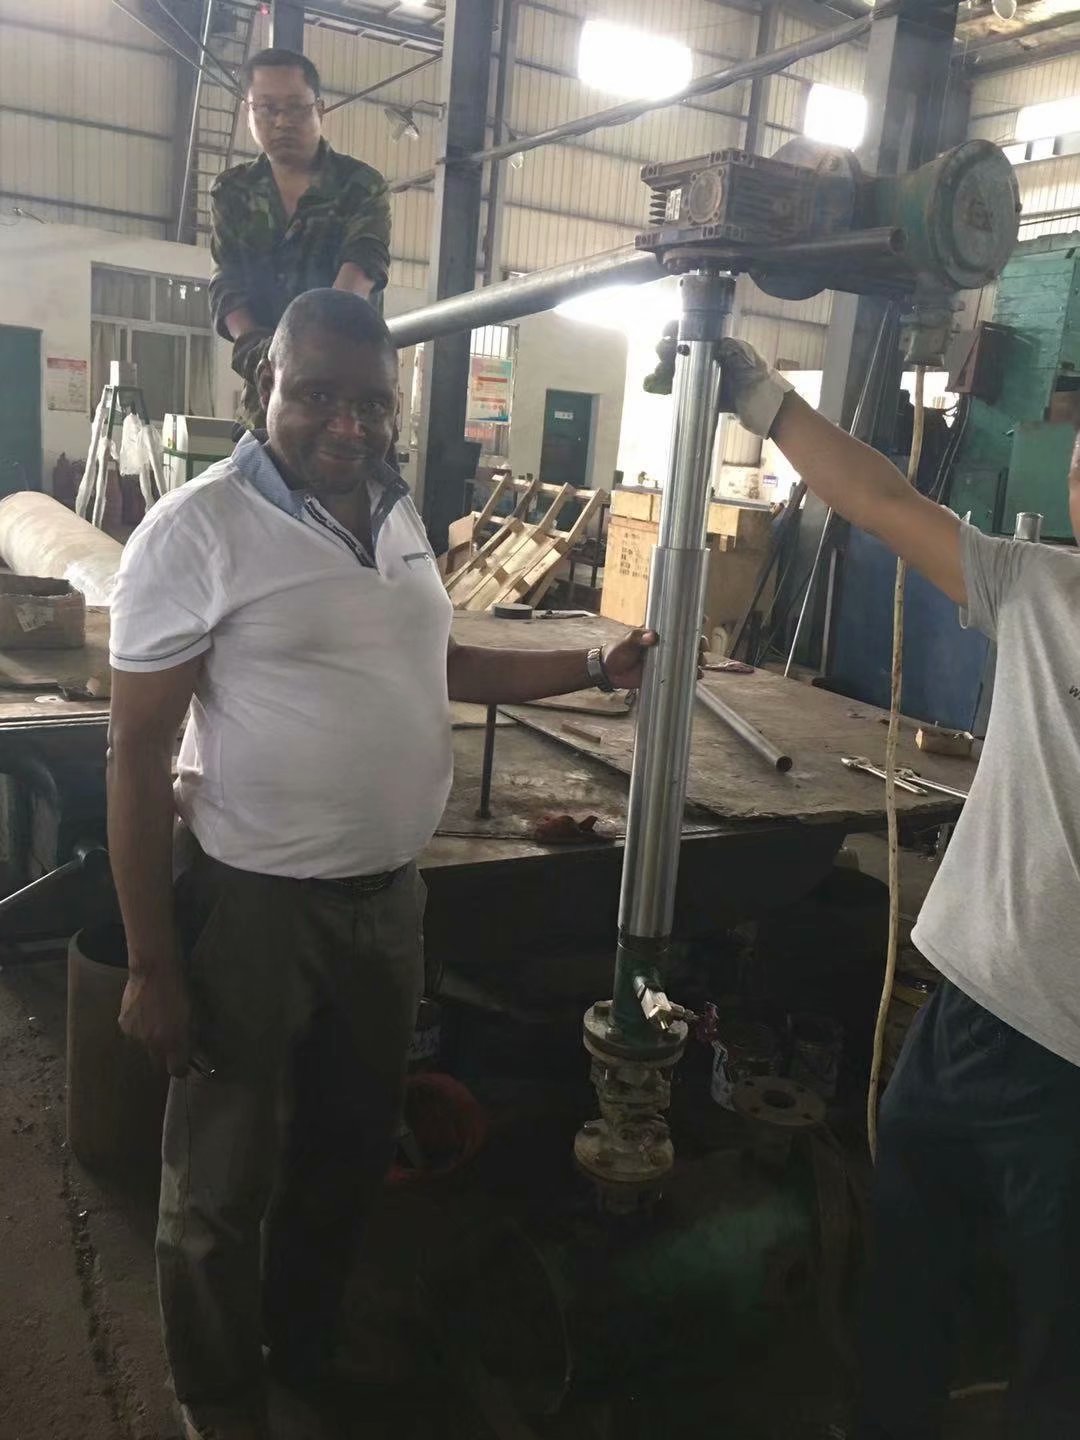 Our client from South Africa visited our factory